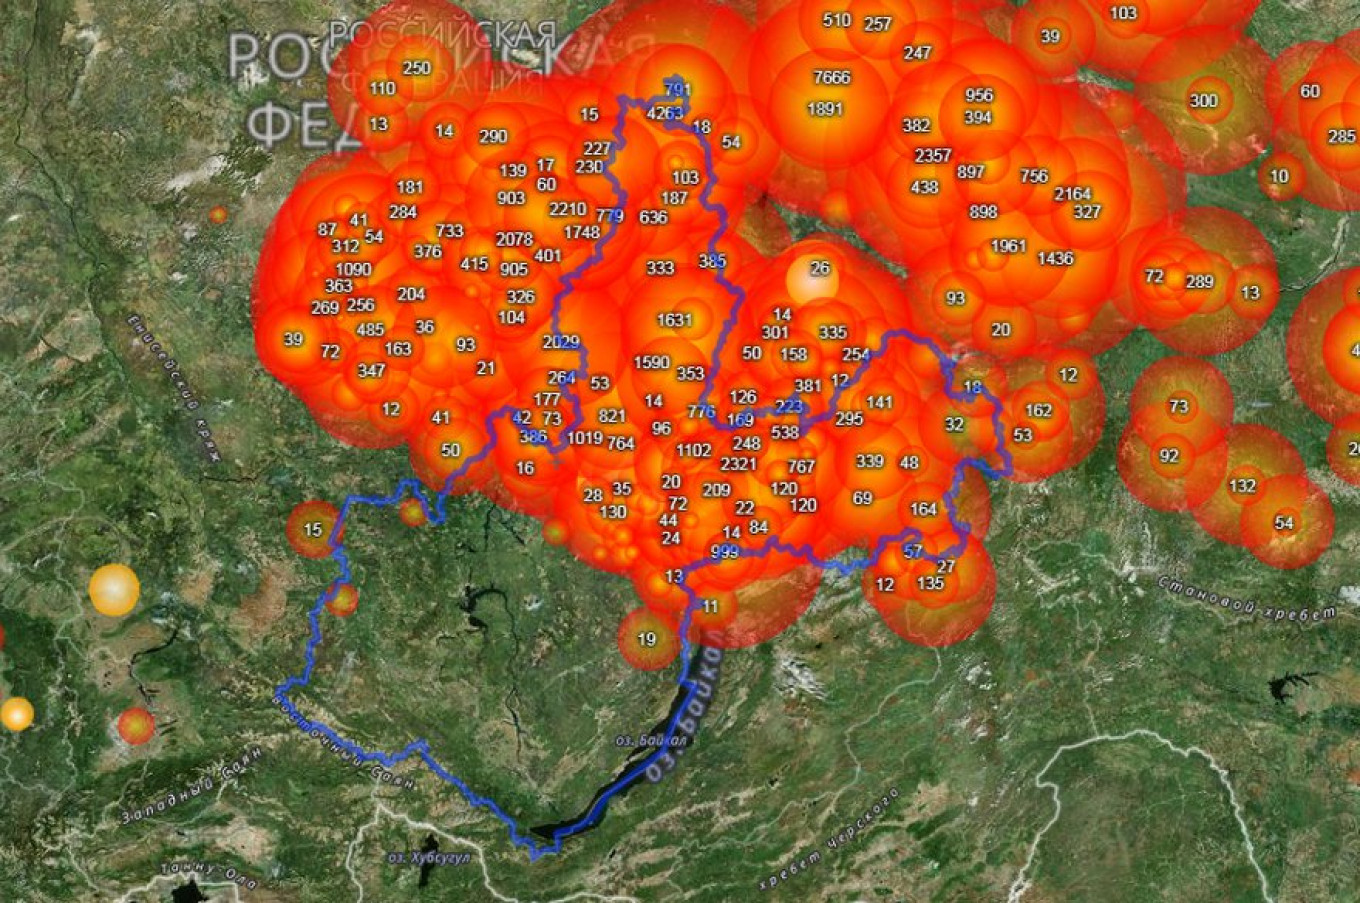 Wildfires Engulf Siberia, Sparking Online Pleas for Help